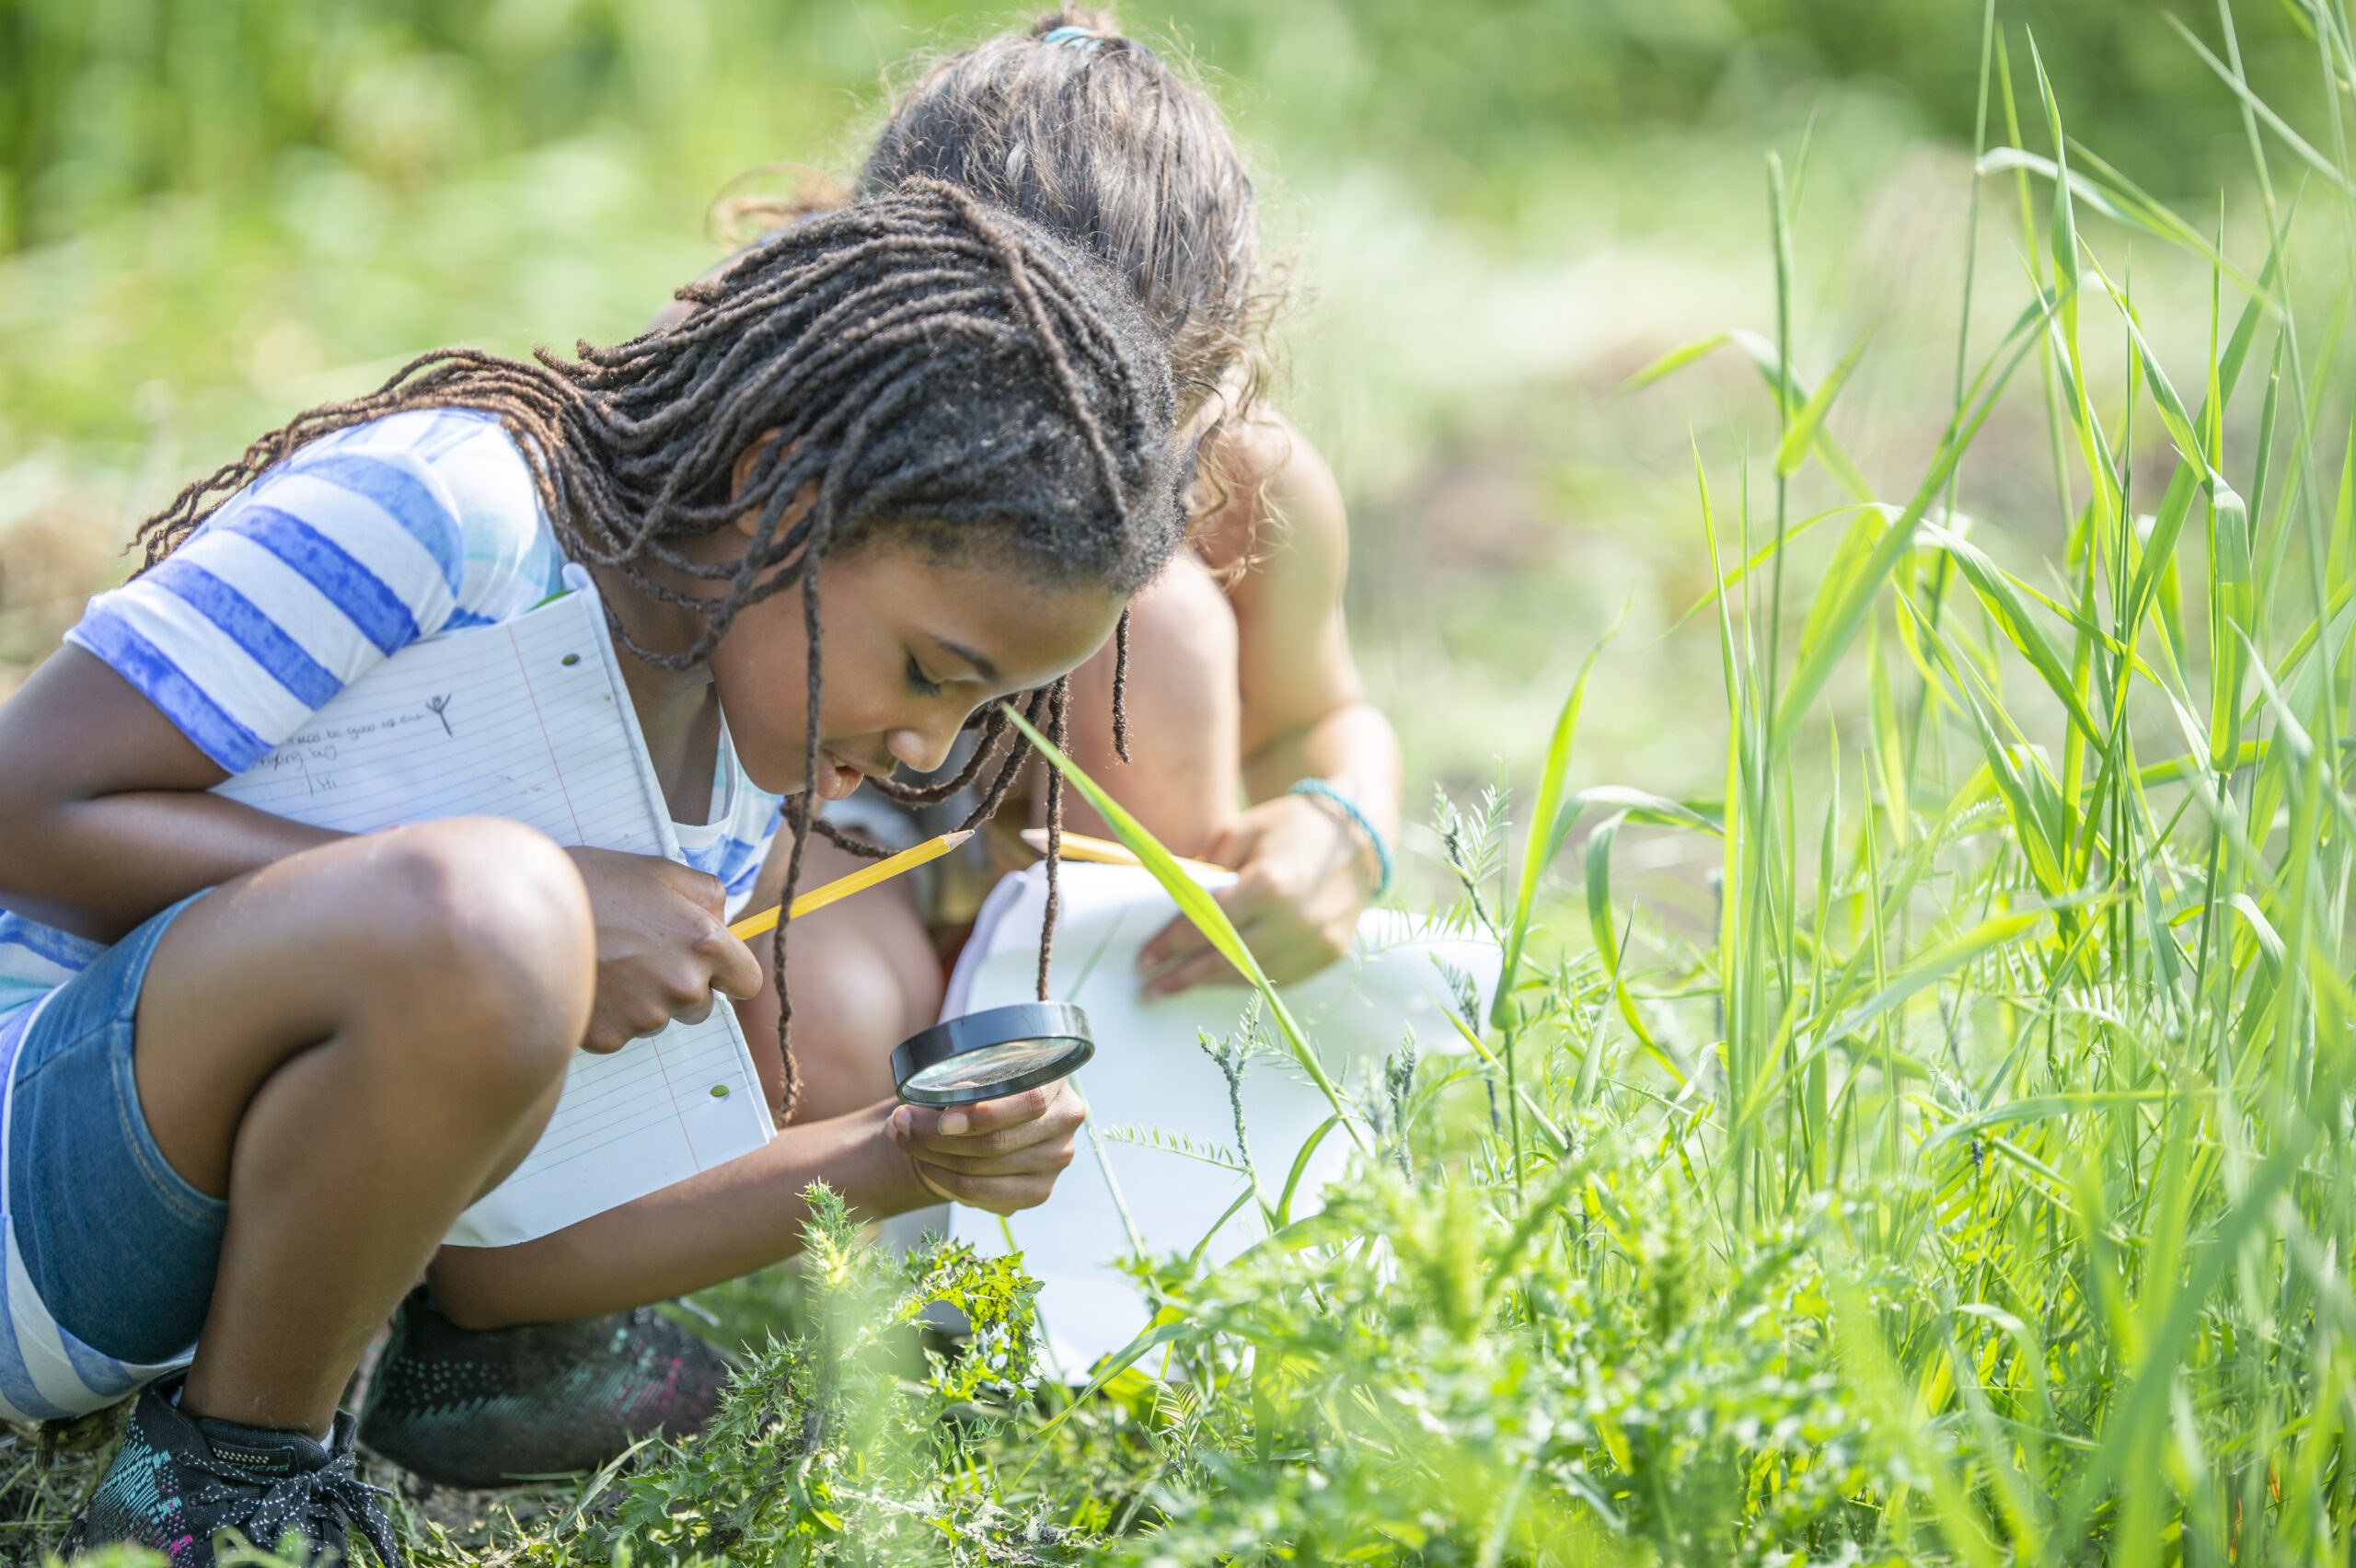 Two female Elementary students look through the grass with magnifying glasses as they explore their surroundings during n outdoor science class.  They are both dressed casually and have paper and pencils in hand to record what they see.